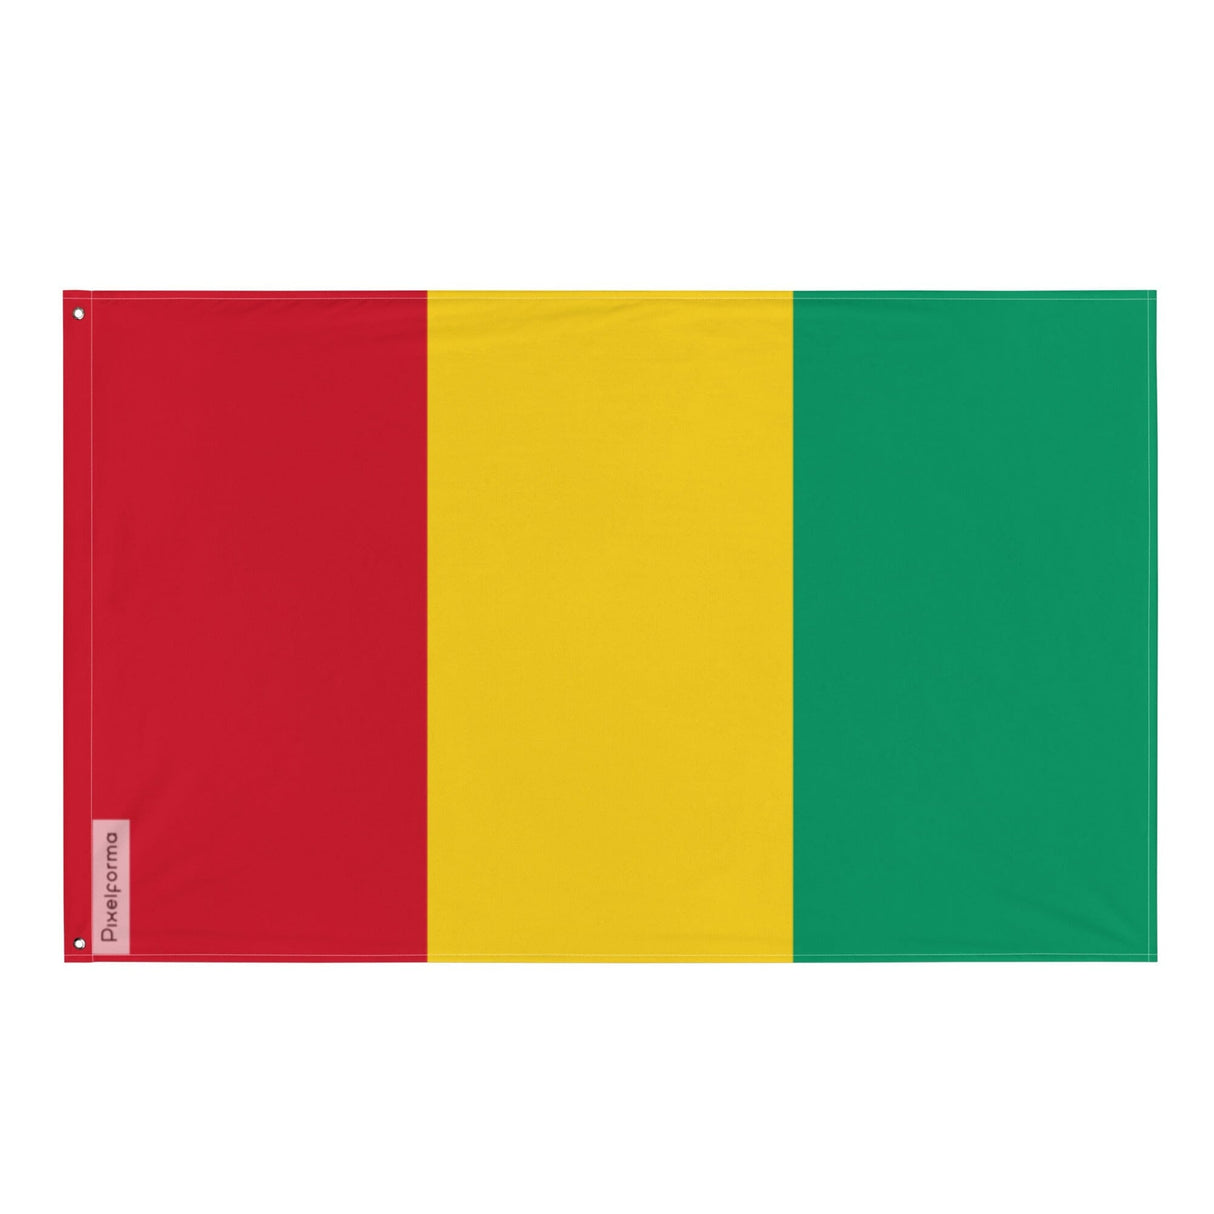 Guinea Flag in Multiple Sizes 100% Polyester Print with Double Hem - Pixelforma